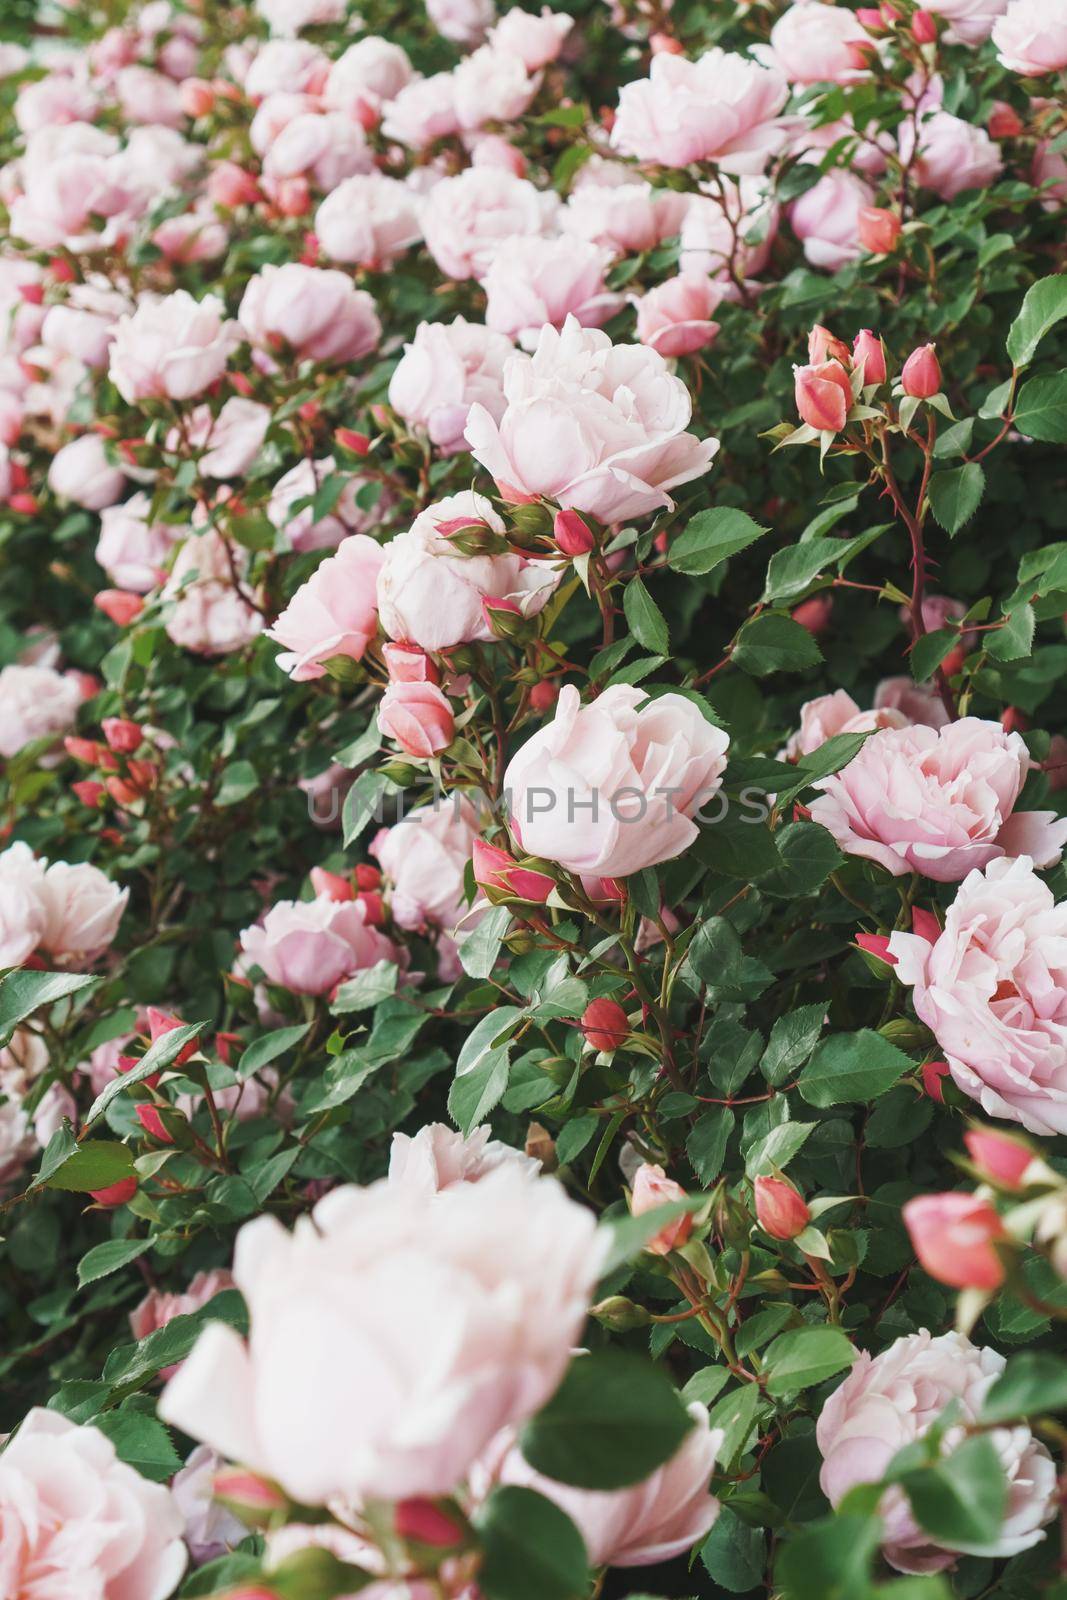 Soft pink roses bloom in bouquets in the garden, as a background. Flowers